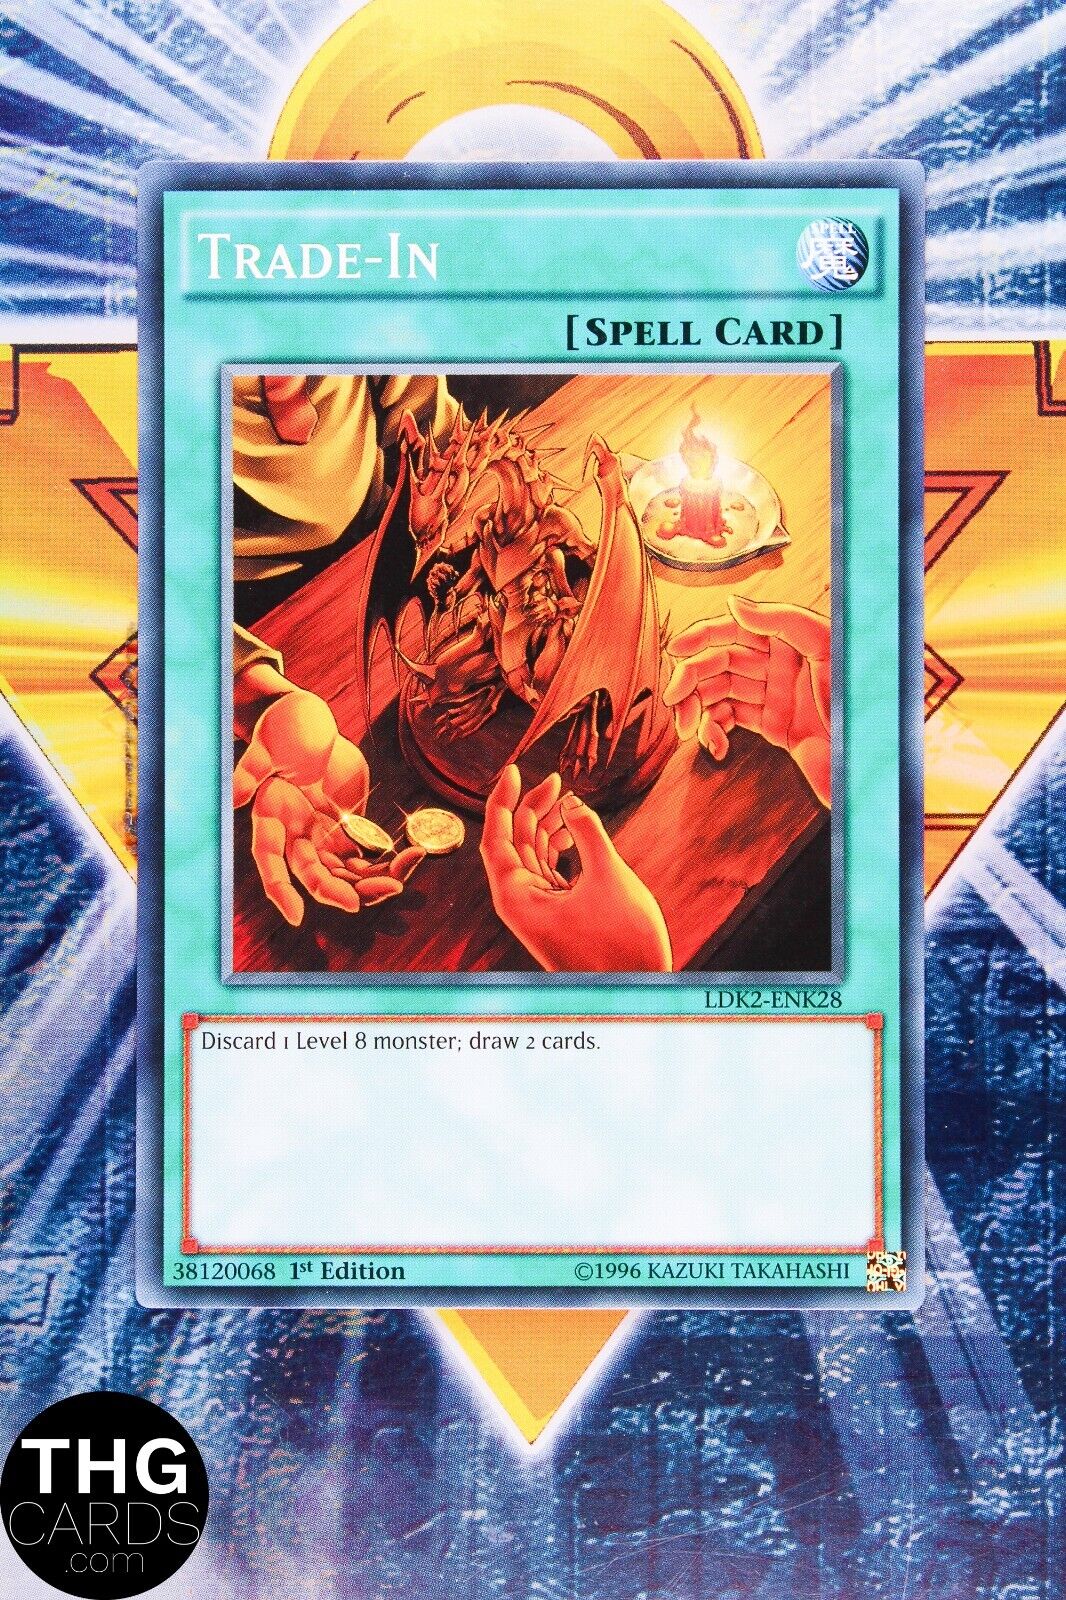 Trade-In LDK2-ENK28 1st Edition Common Yugioh Card